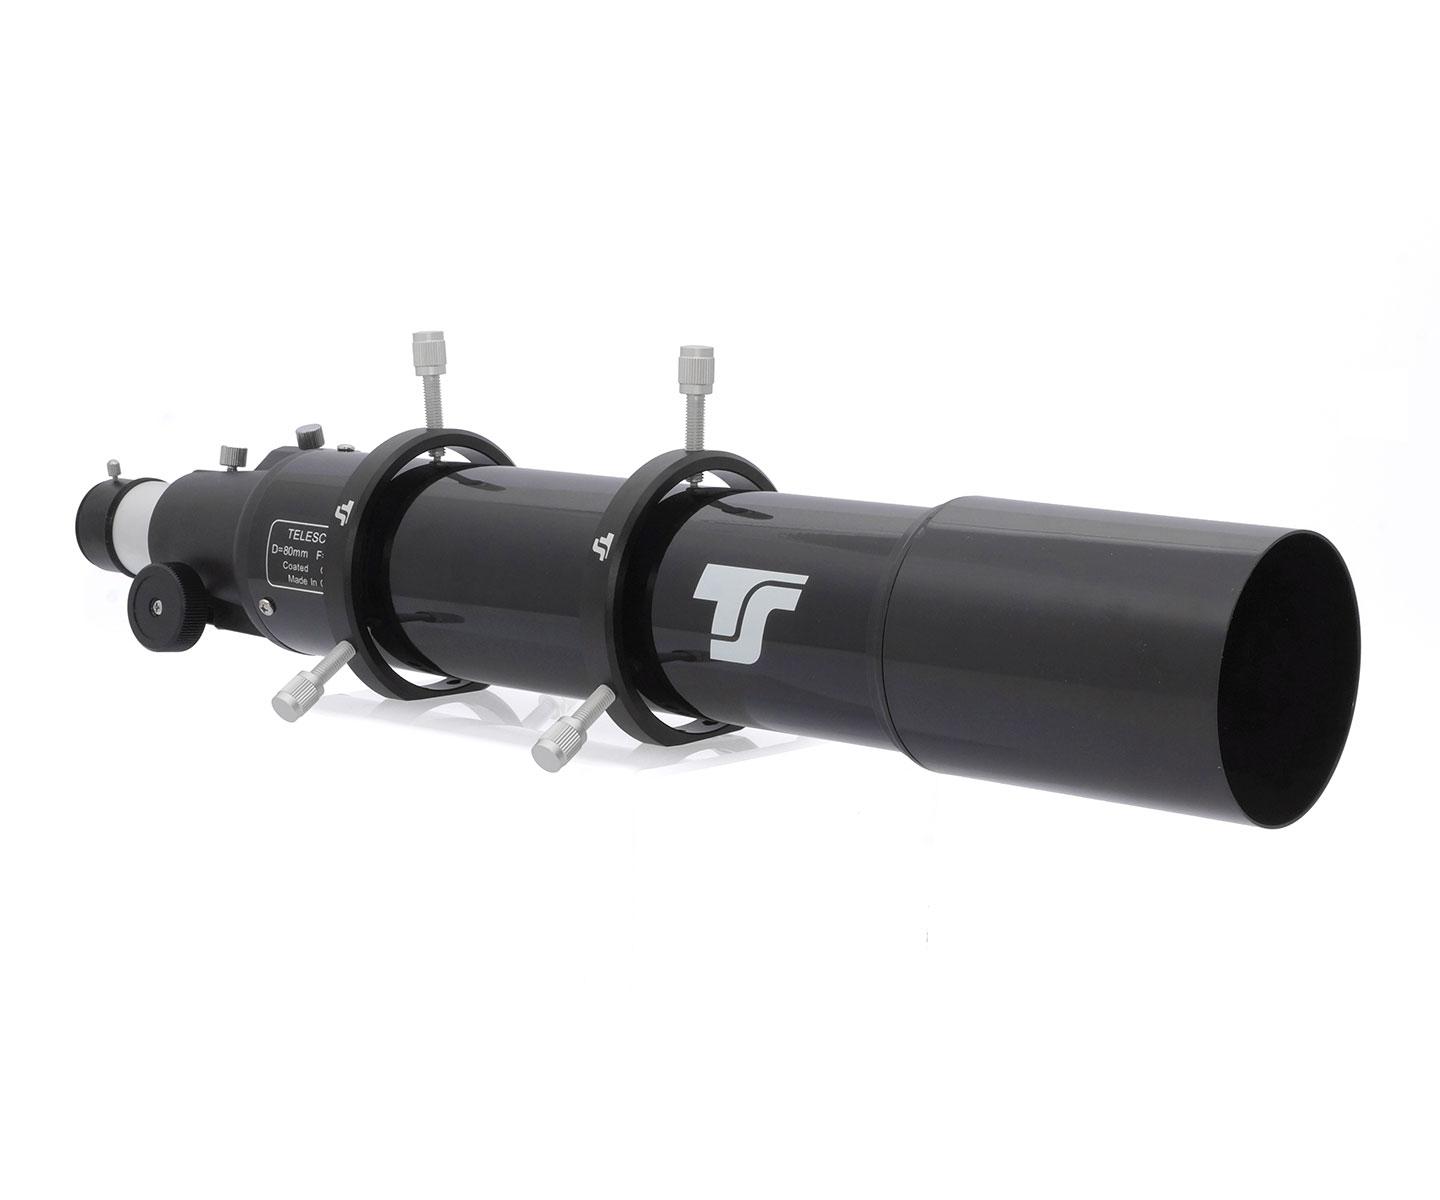  TS-Optics Guiding Scope 80/600 mm with adjustable tube rings [EN] 